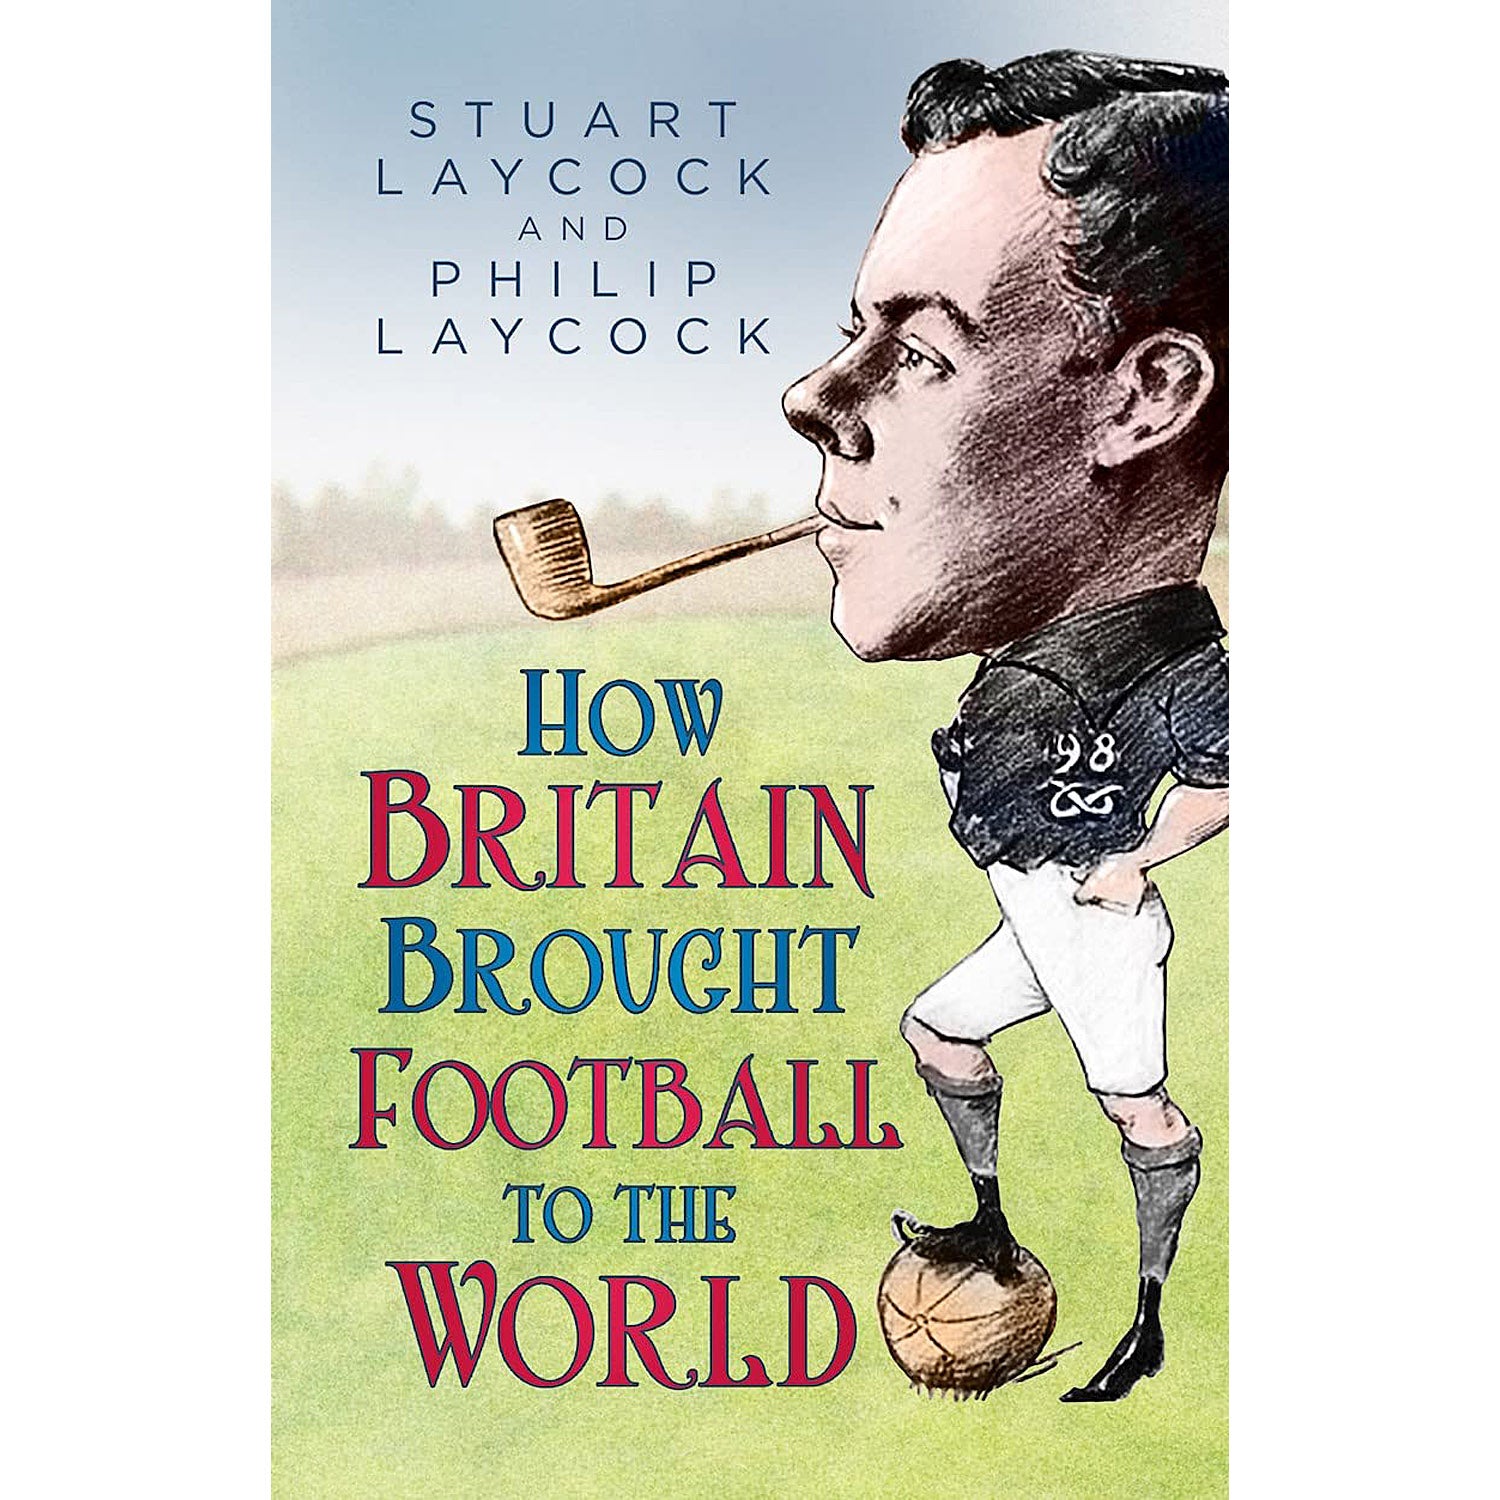 How Britain Brought Football to the World